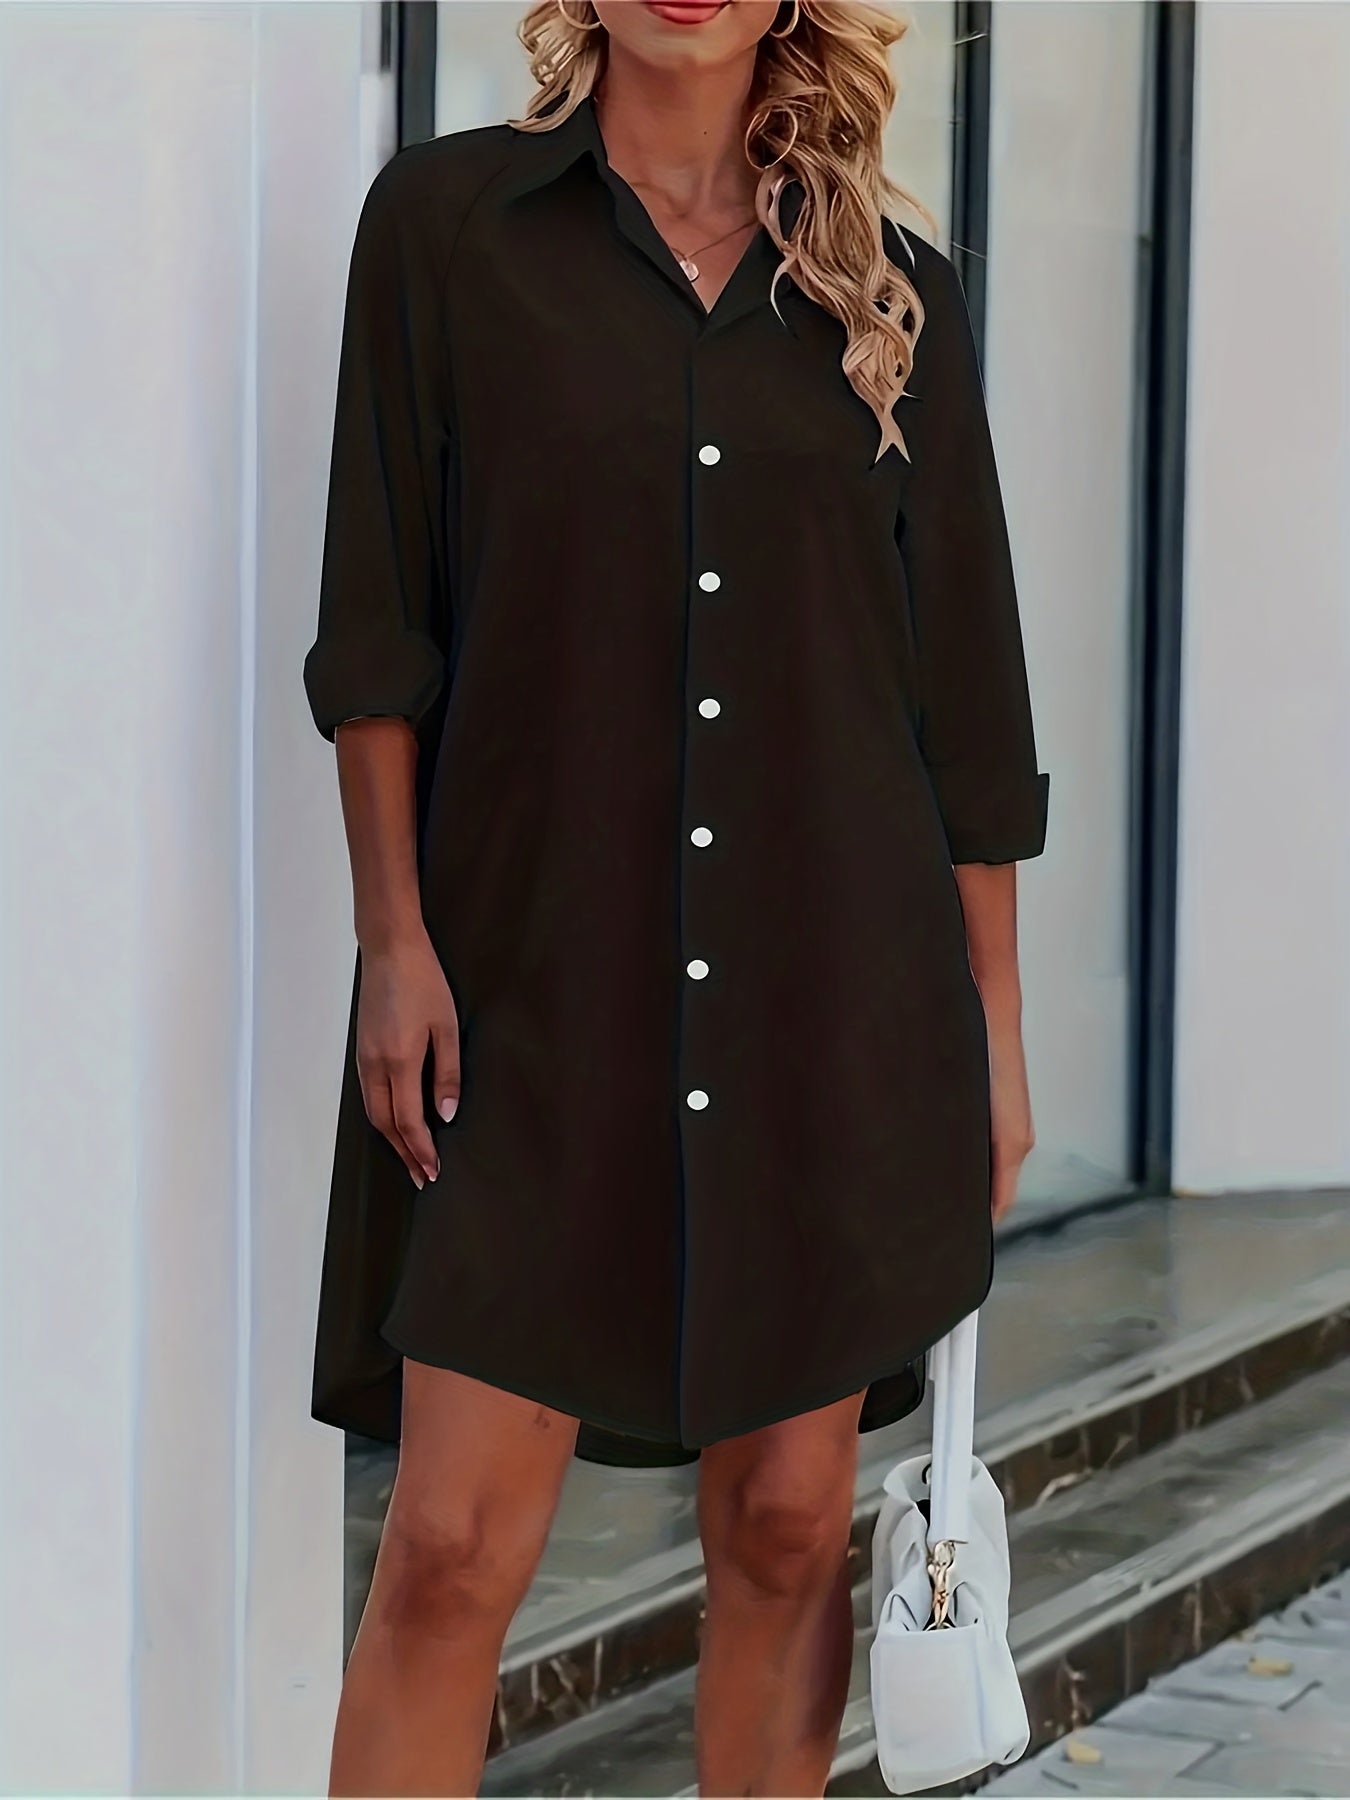 Antmvs Button Front Shirt Dress, Sexy 3/4 Sleeve Solid Turn Down Collar Dress, Women's Clothing